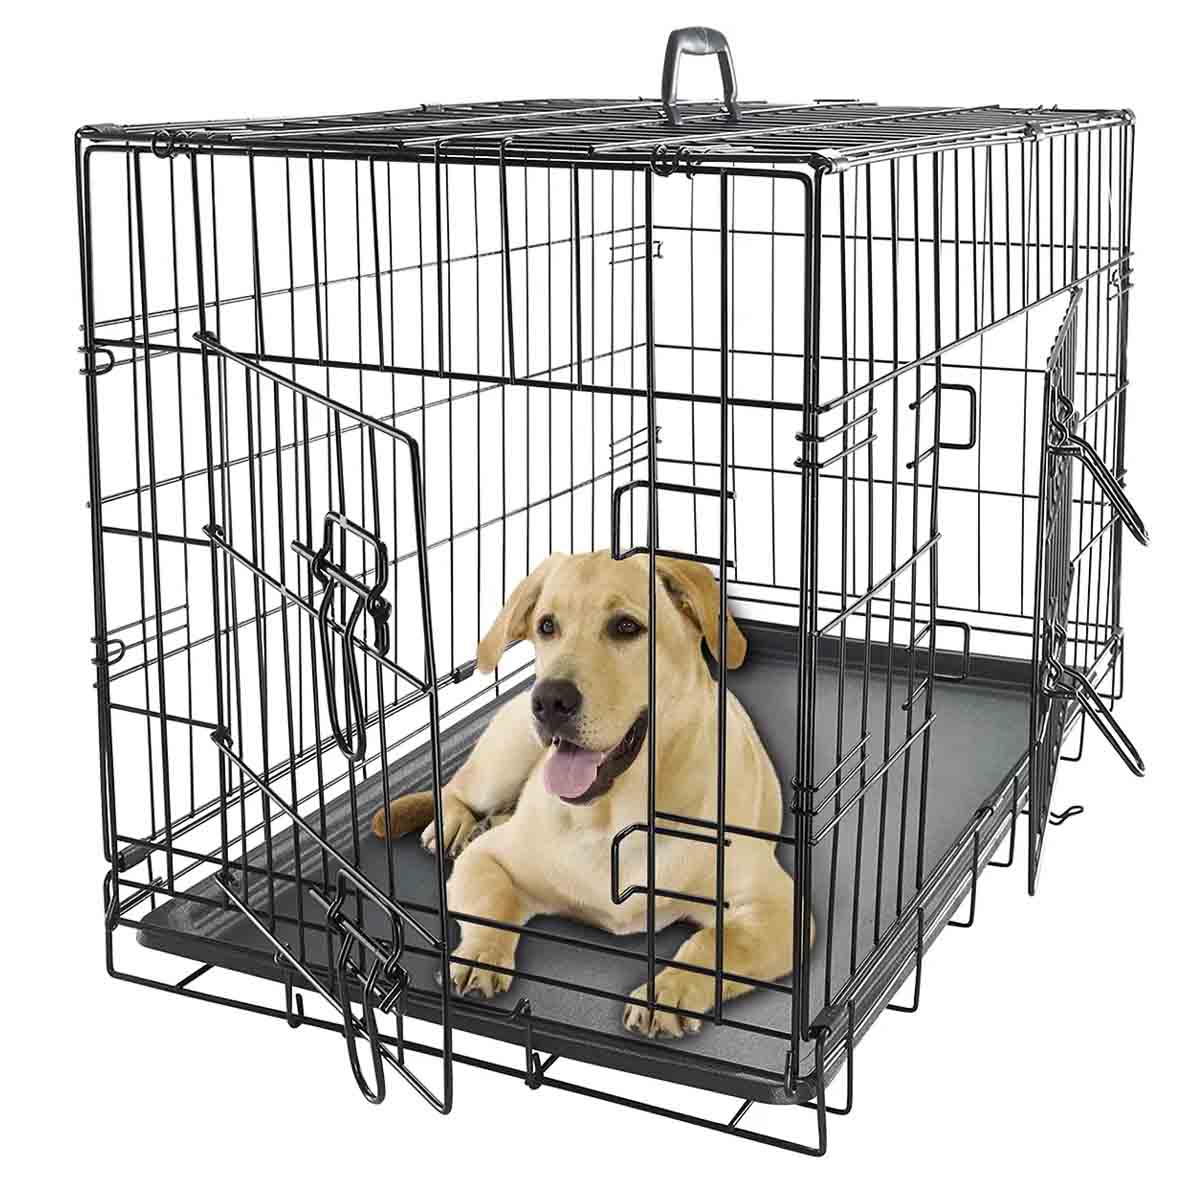 Collapsible Metal Dog Crate Portable Kennels XXL-48inch XL-42inch L-36inch M-30inch S-24inch - 1